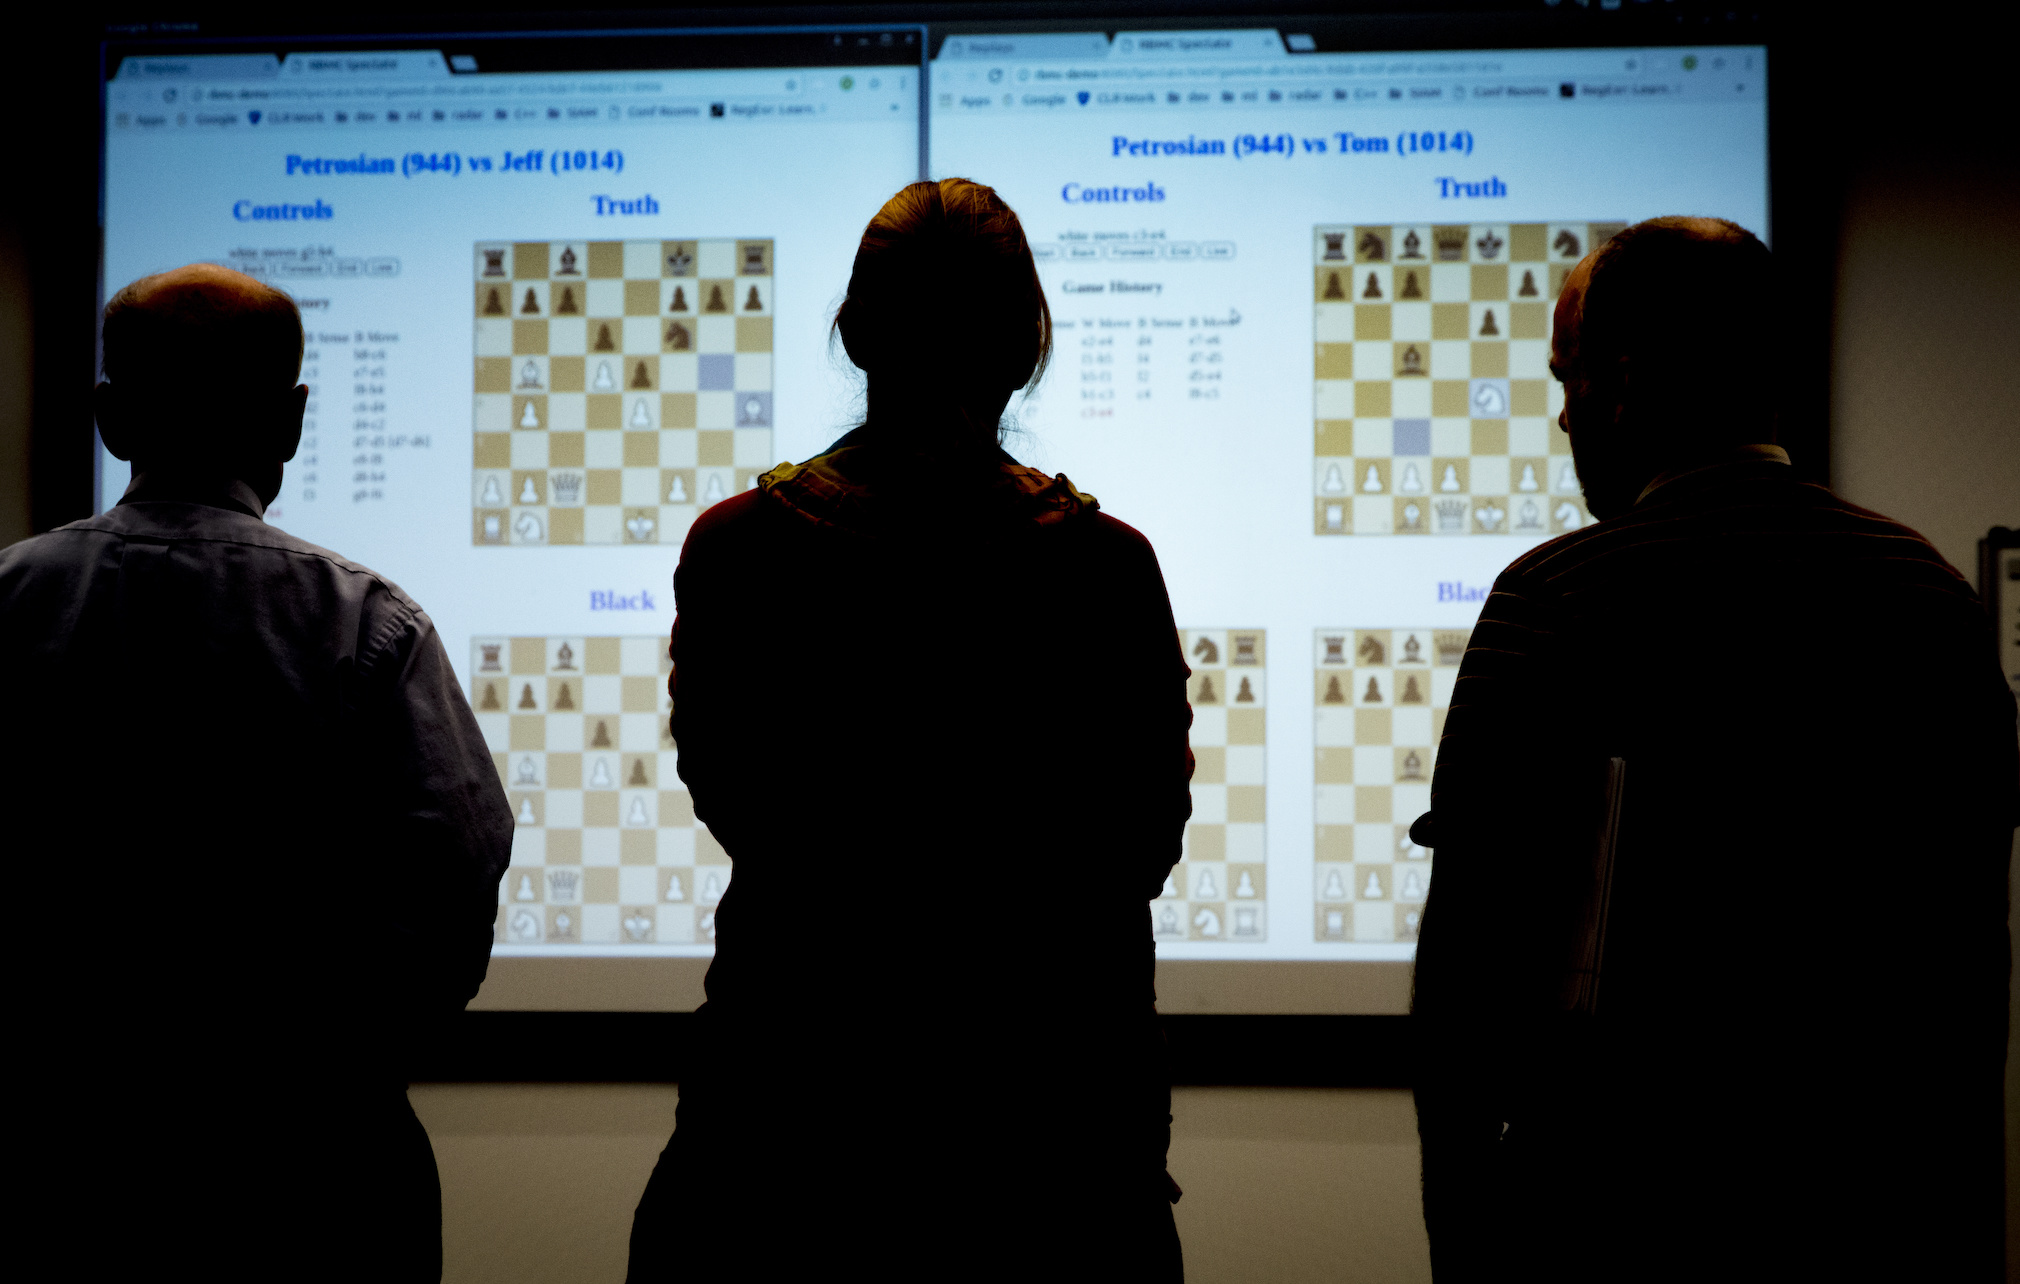 Participants in an internal Reconnaissance Chess Challenge at APL observe a player’s moves.